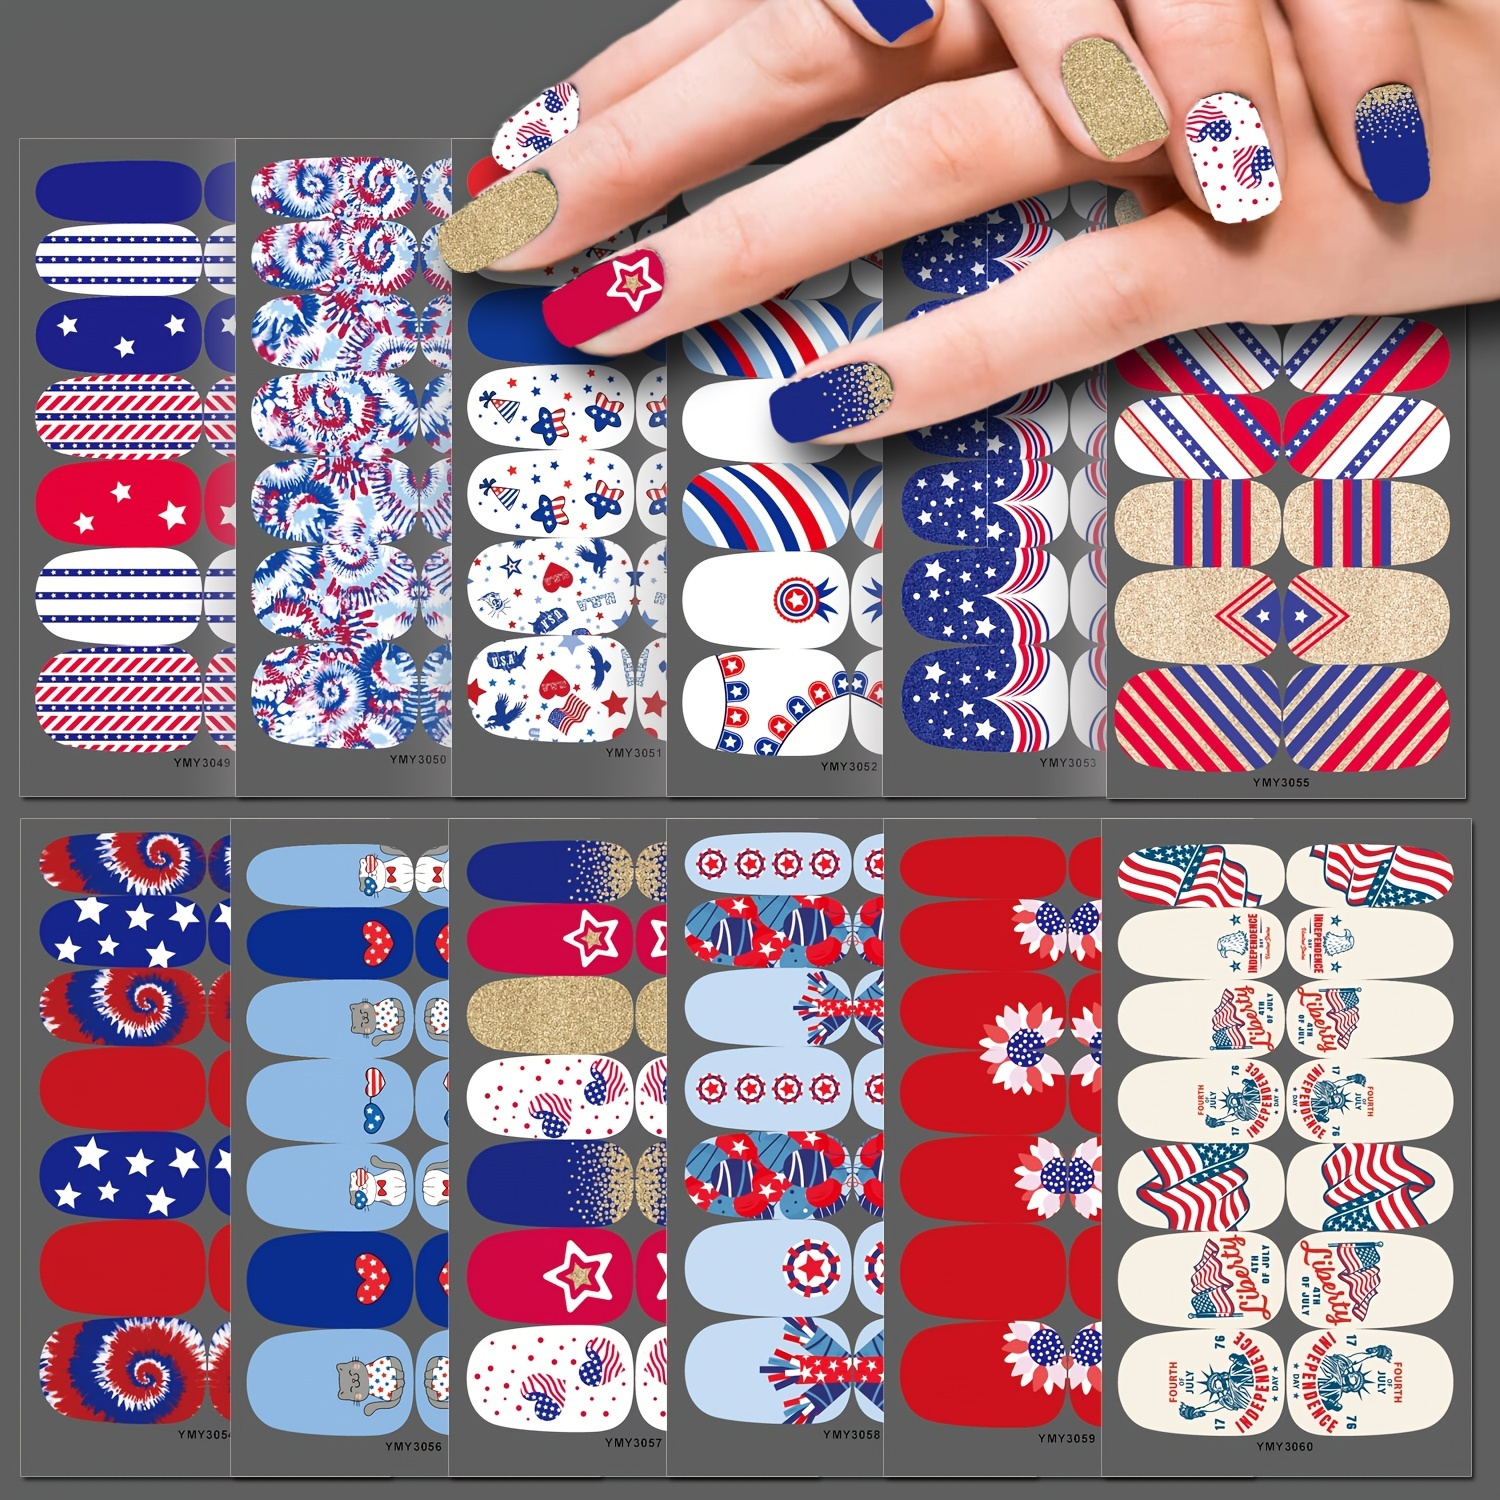 

Independence Day Full Wrap Nail Polish Stickers - Self-adhesive Nail Art Decal Strips For Women And Girls - Diy Manicure Decoration Kit For Labor Day